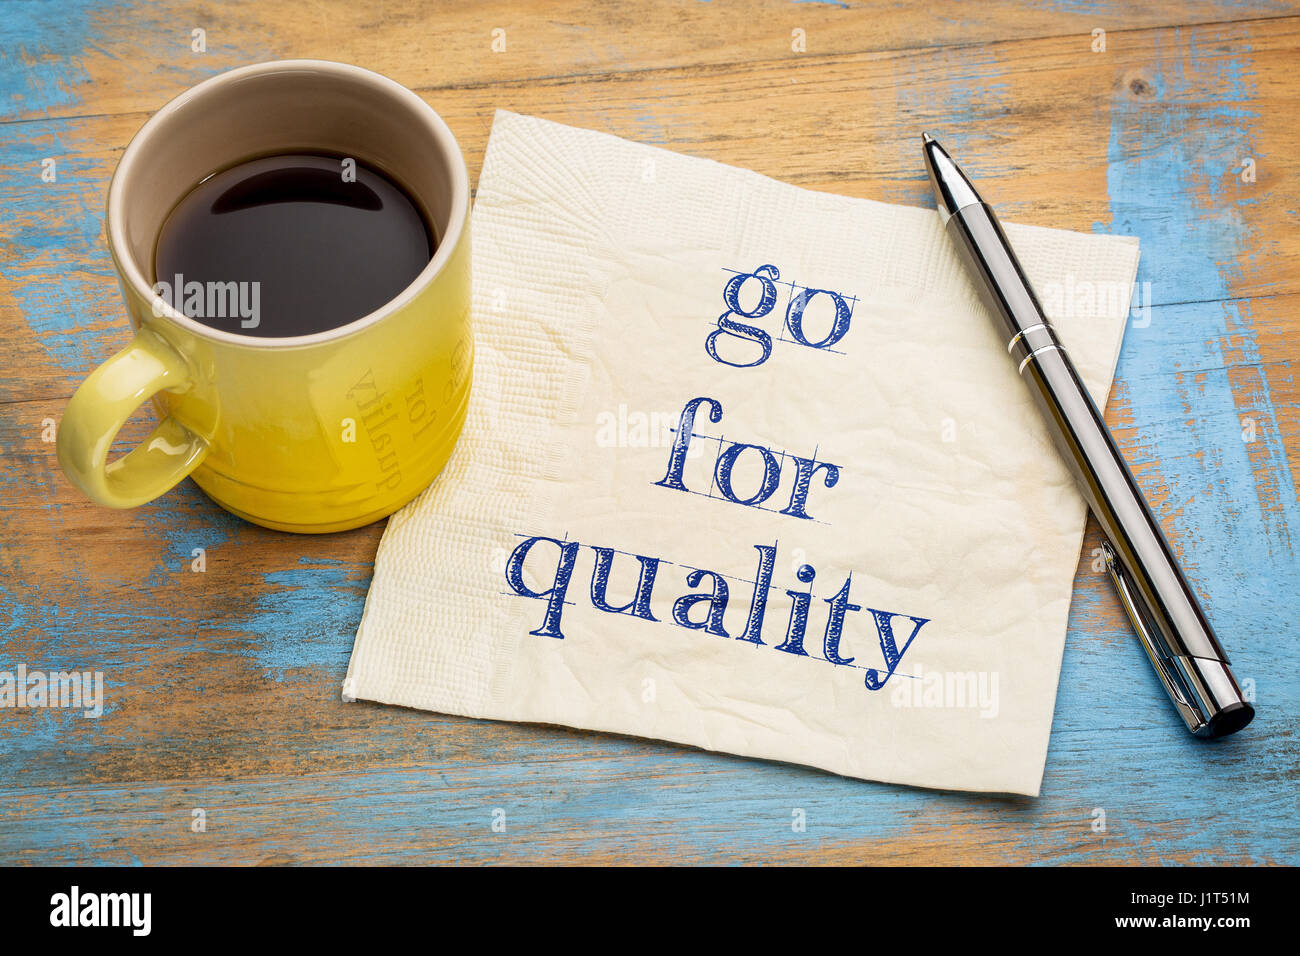 Go for quality advice or reminder - handwriting on a napkin with a cup of espresso coffee Stock Photo